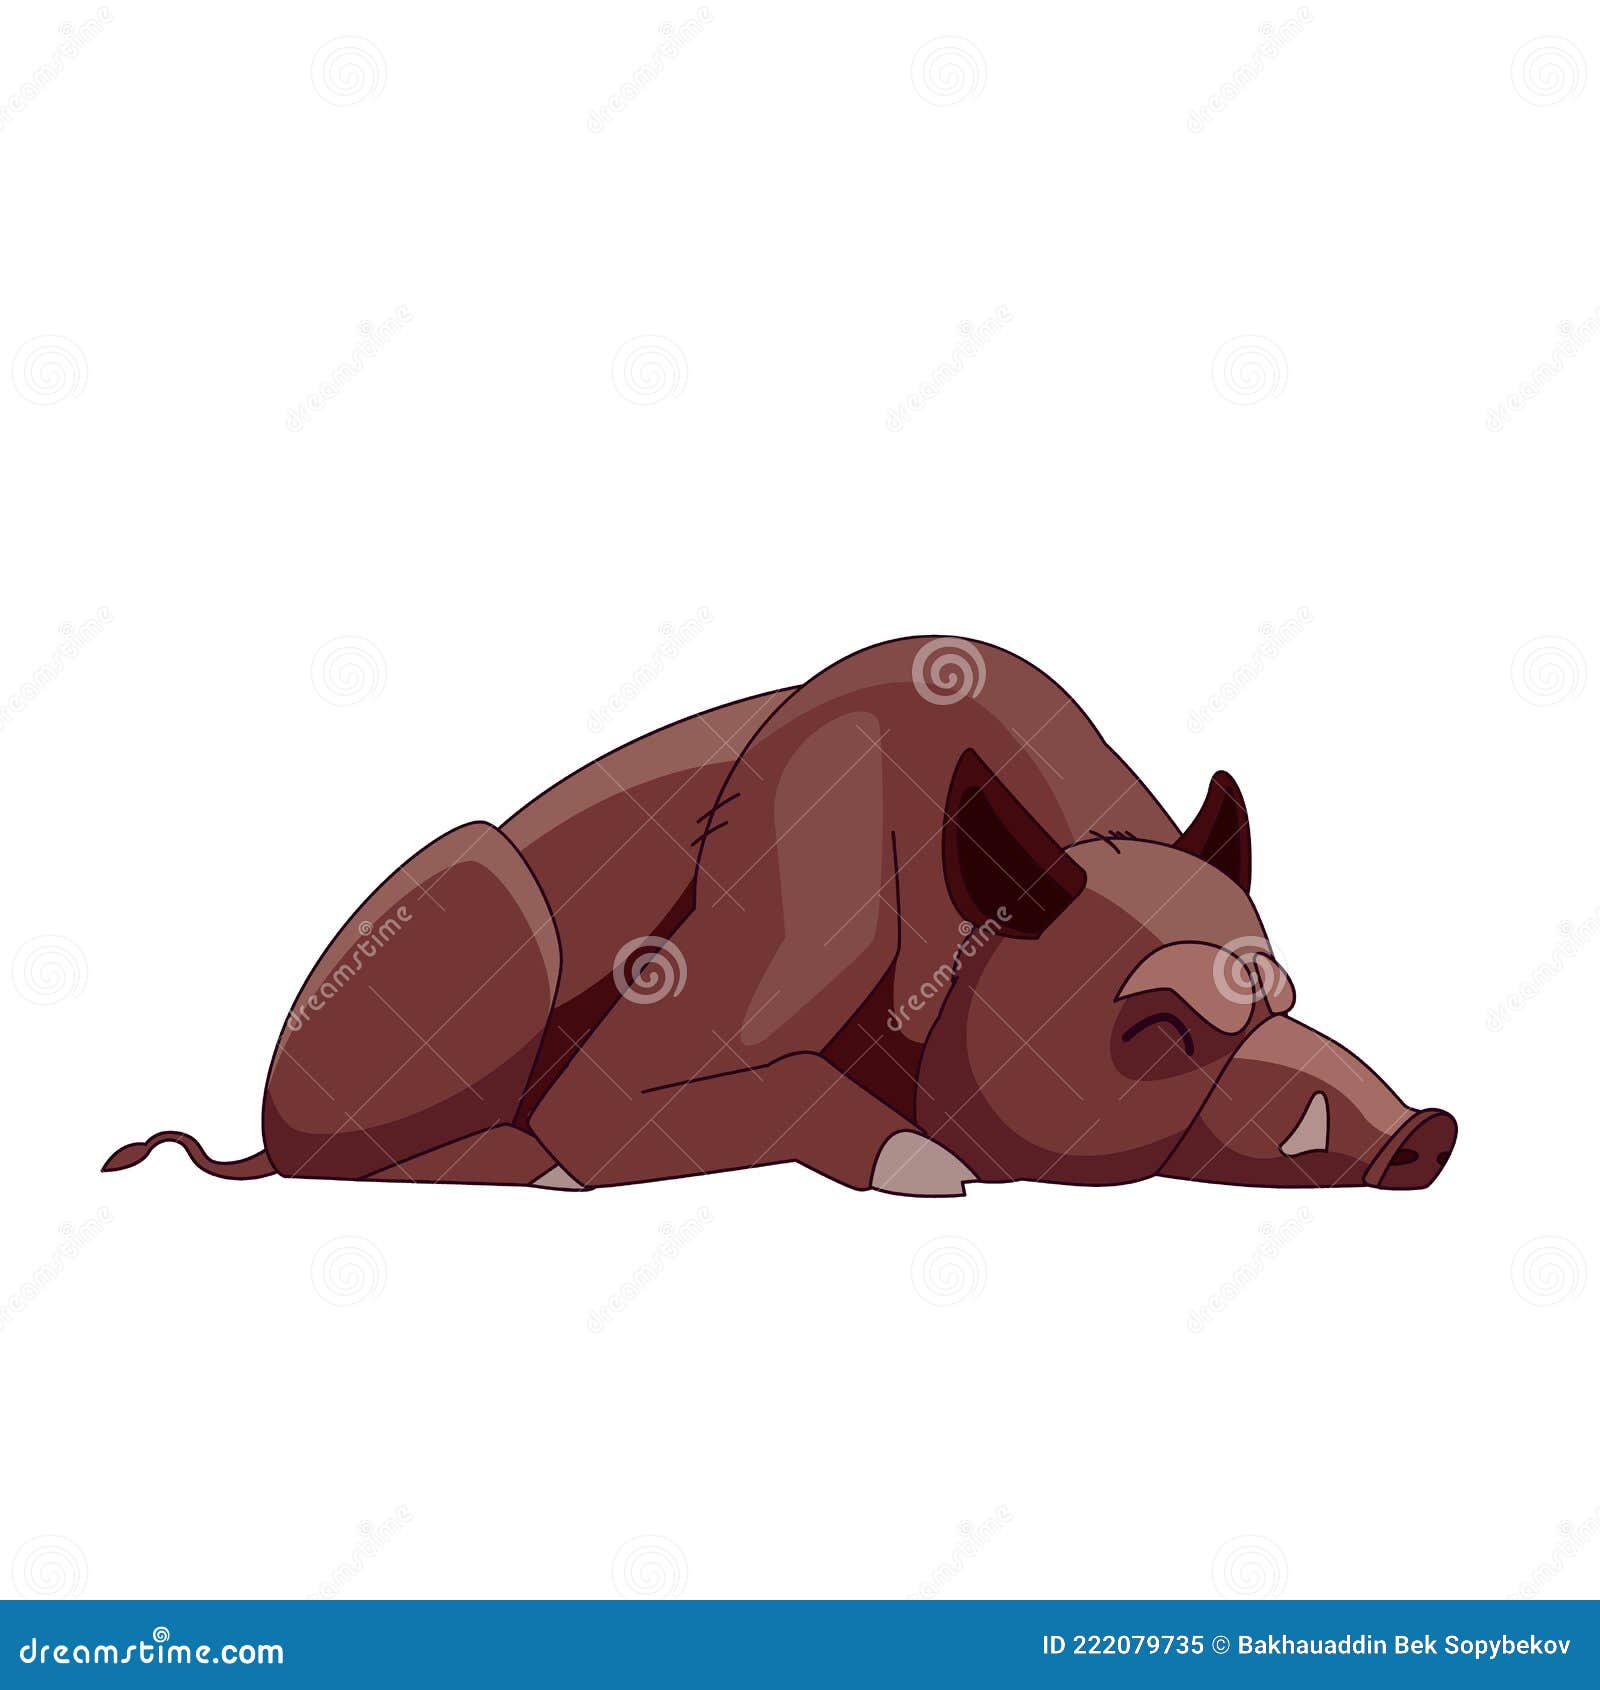 Wild Boar Sleeping or Dead. Cartoon Character of an Adult Mammal Animal. a  Wild Forest Creature with Brown Fur Stock Vector - Illustration of europe,  black: 222079735